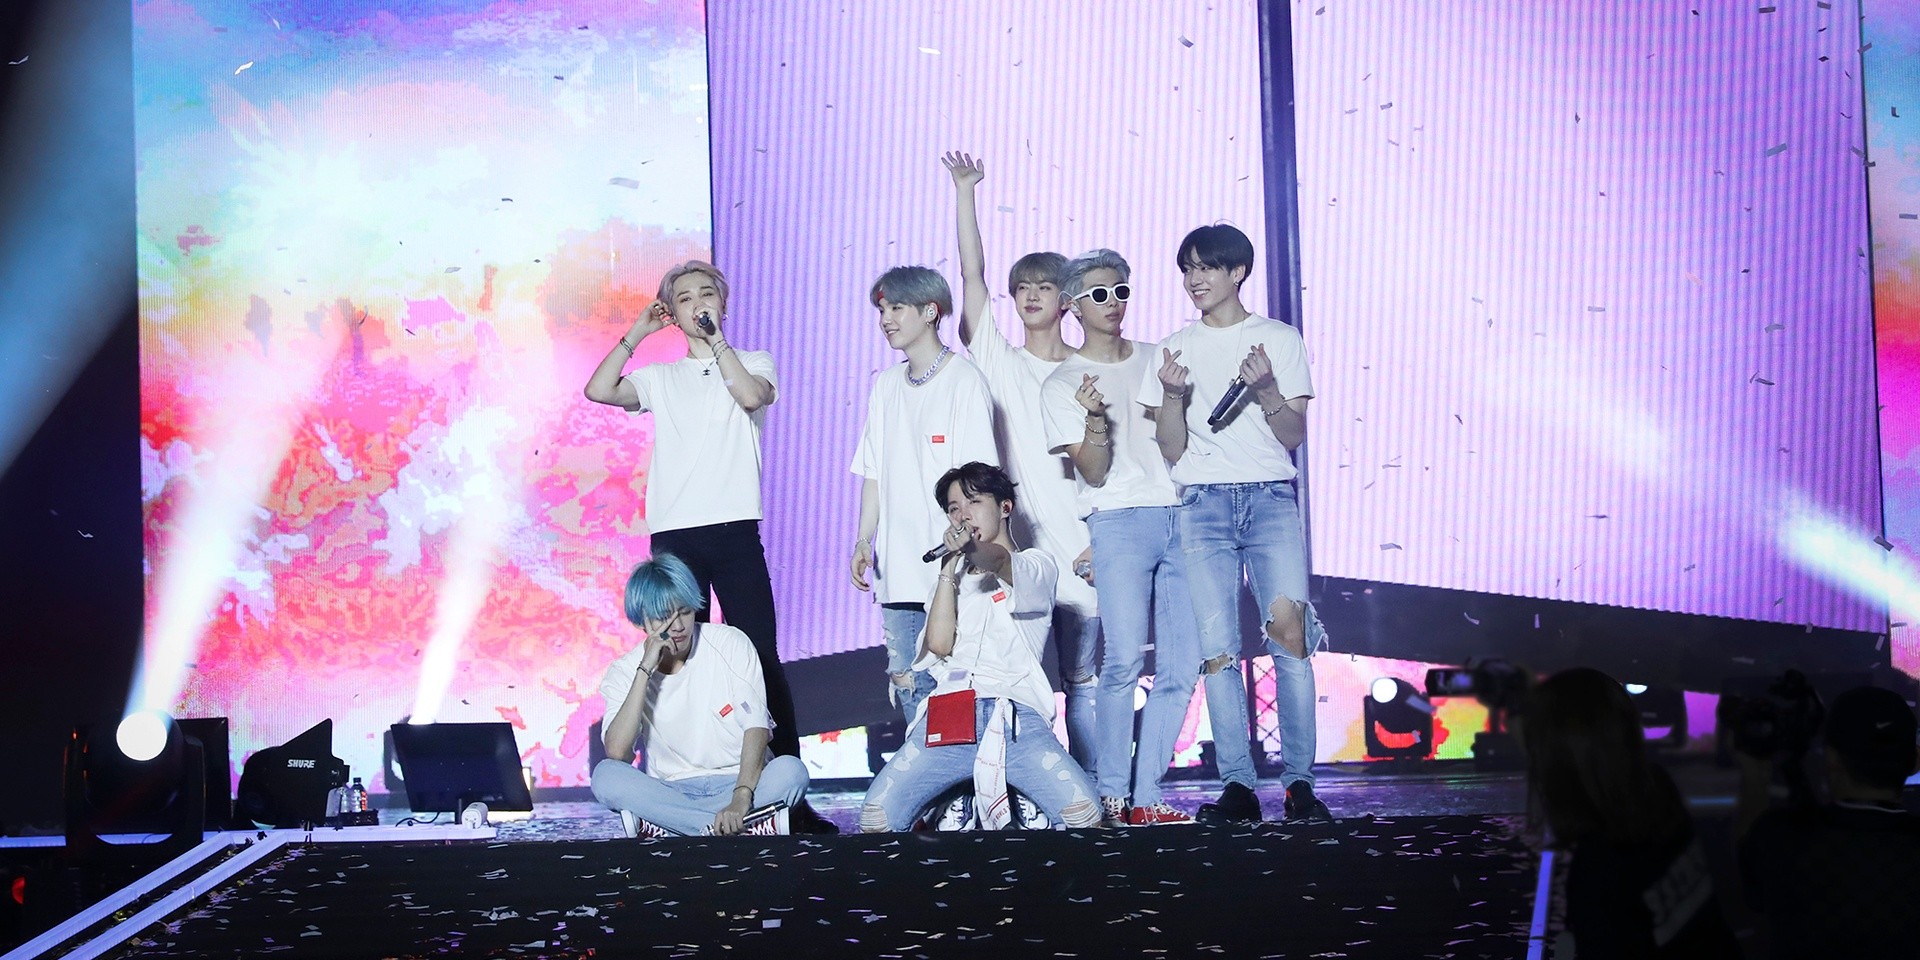 BTS announce the official cancellation of 'MAP OF THE SOUL' world tour, fans show support with #ARMYwillwaitforBTS